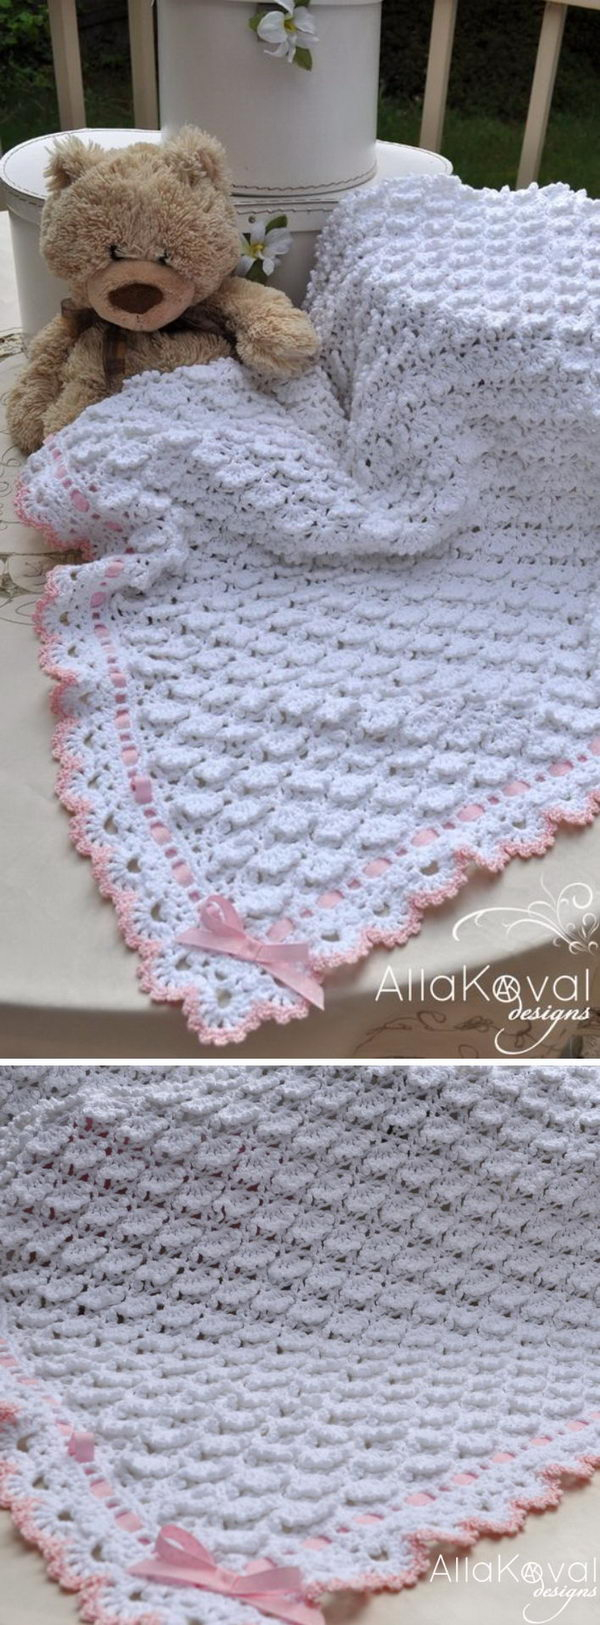 Crochet Patterns For Babies 30 Free Crochet Patterns For Blankets Hative